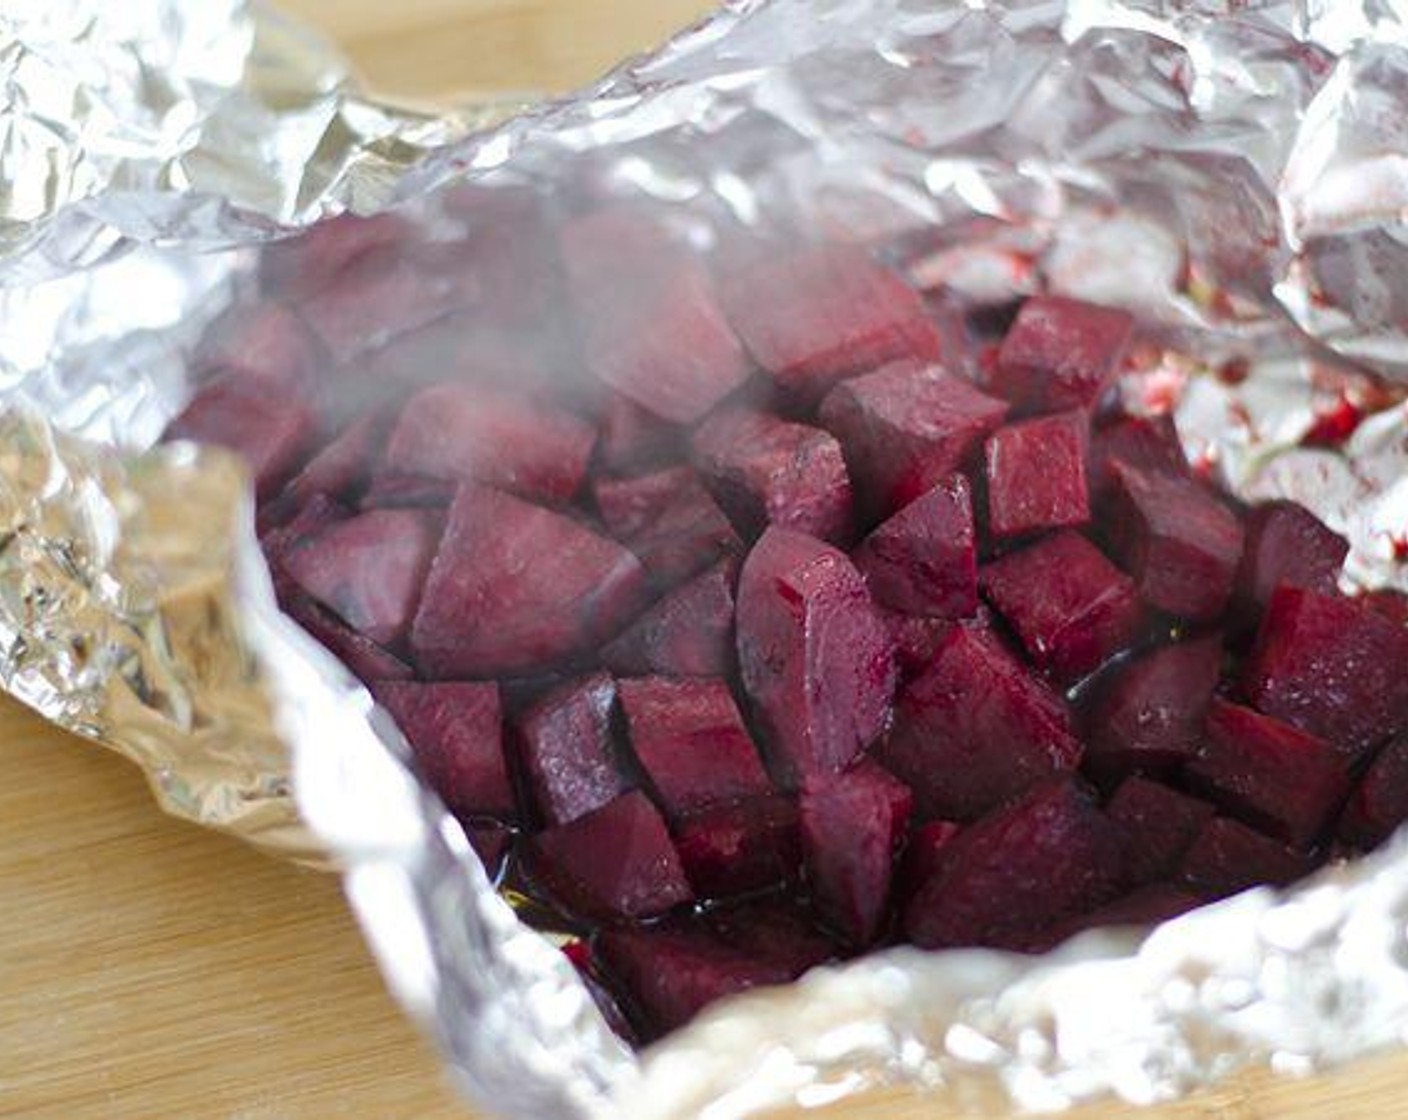 step 2 Trim, peel, and chop Beets (2) into 1/2-inch cubes. Drizzle with a little bit of Extra-Virgin Olive Oil (1 Tbsp) and place in an aluminum foil pouch.